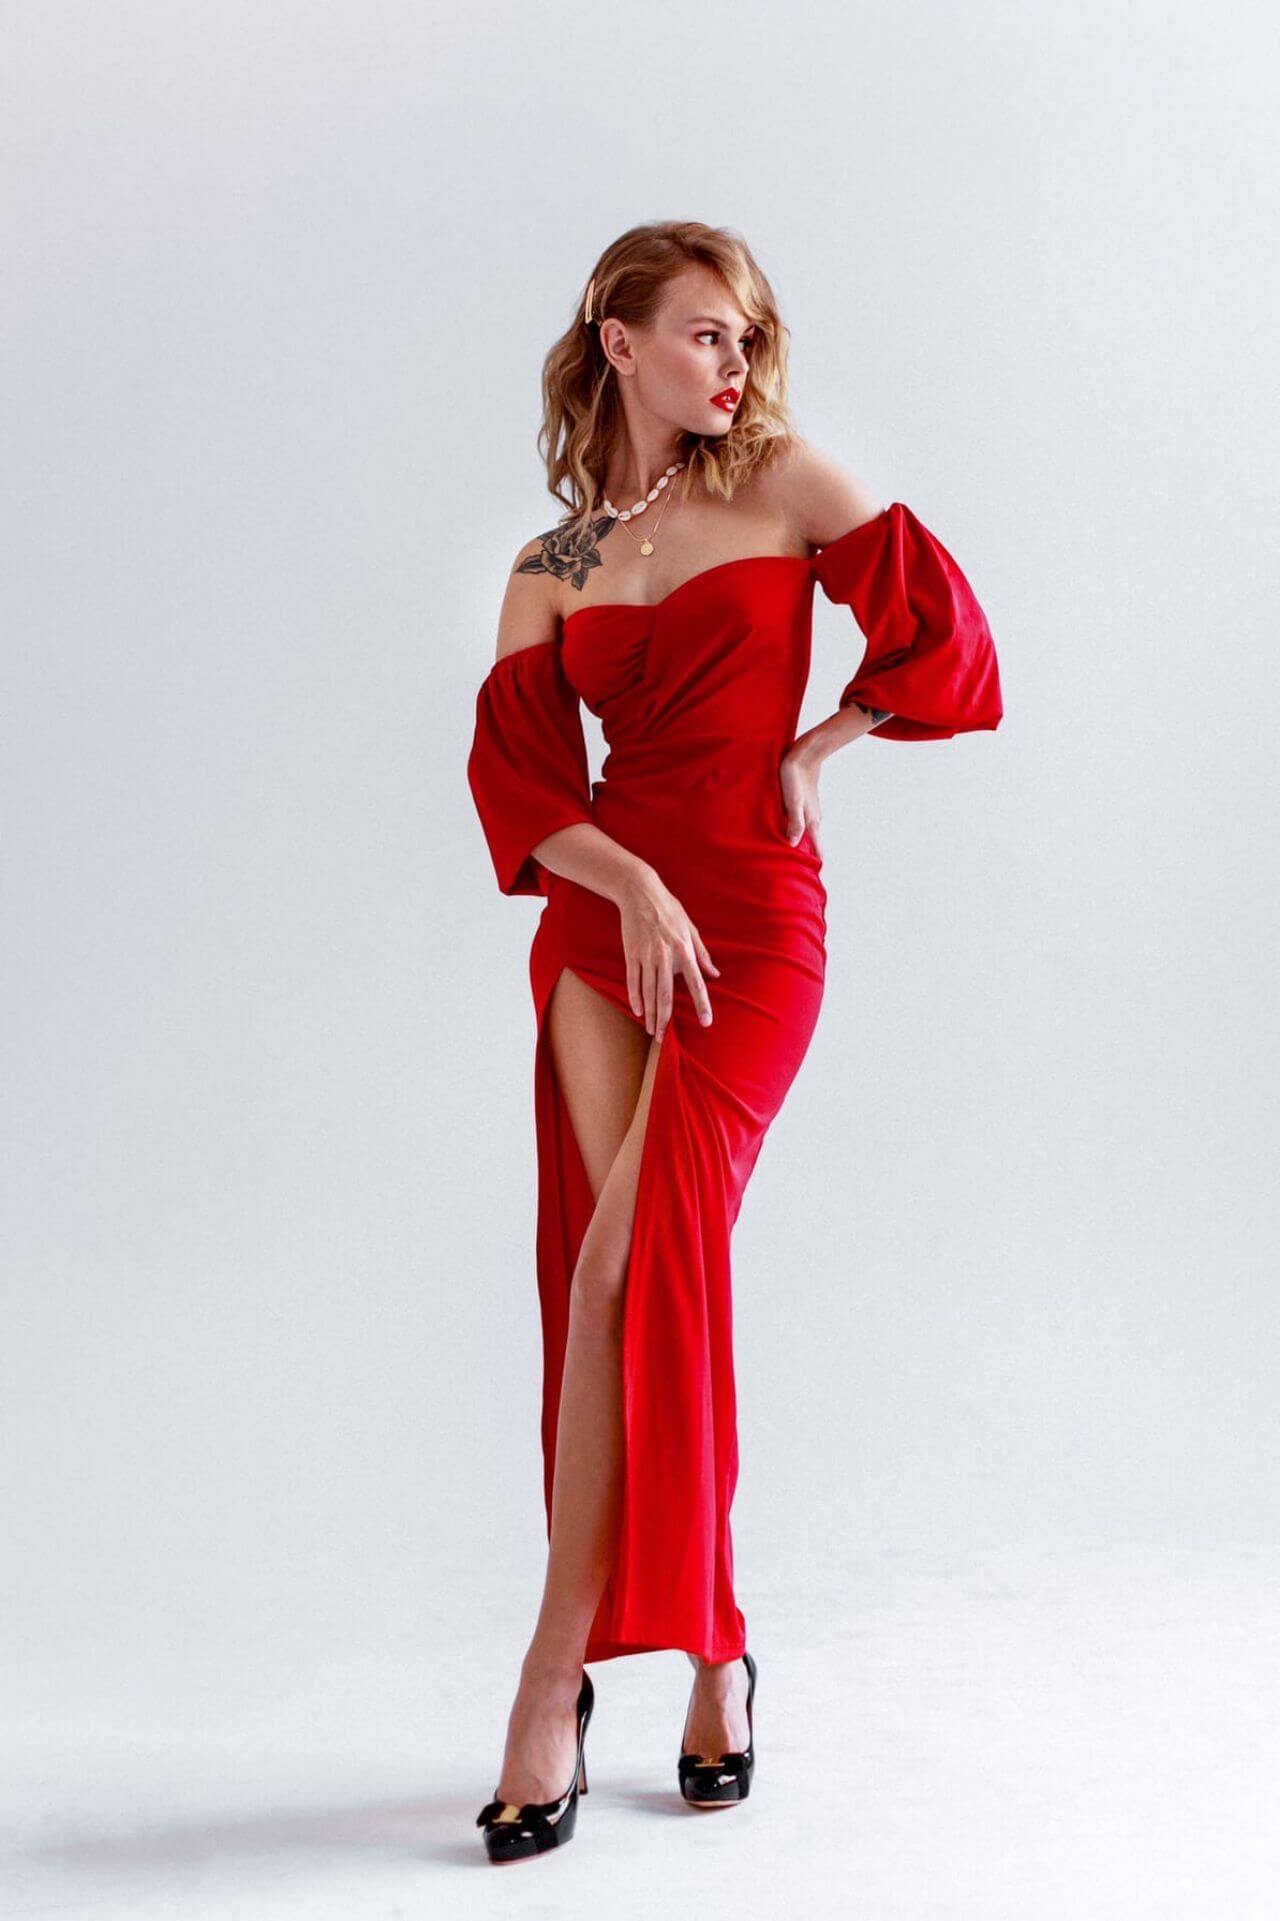 Anastasiya Scheglova In Red Off Shoulder With Baggy Sleeves Long High Slit Cut Dress At Photoshoot